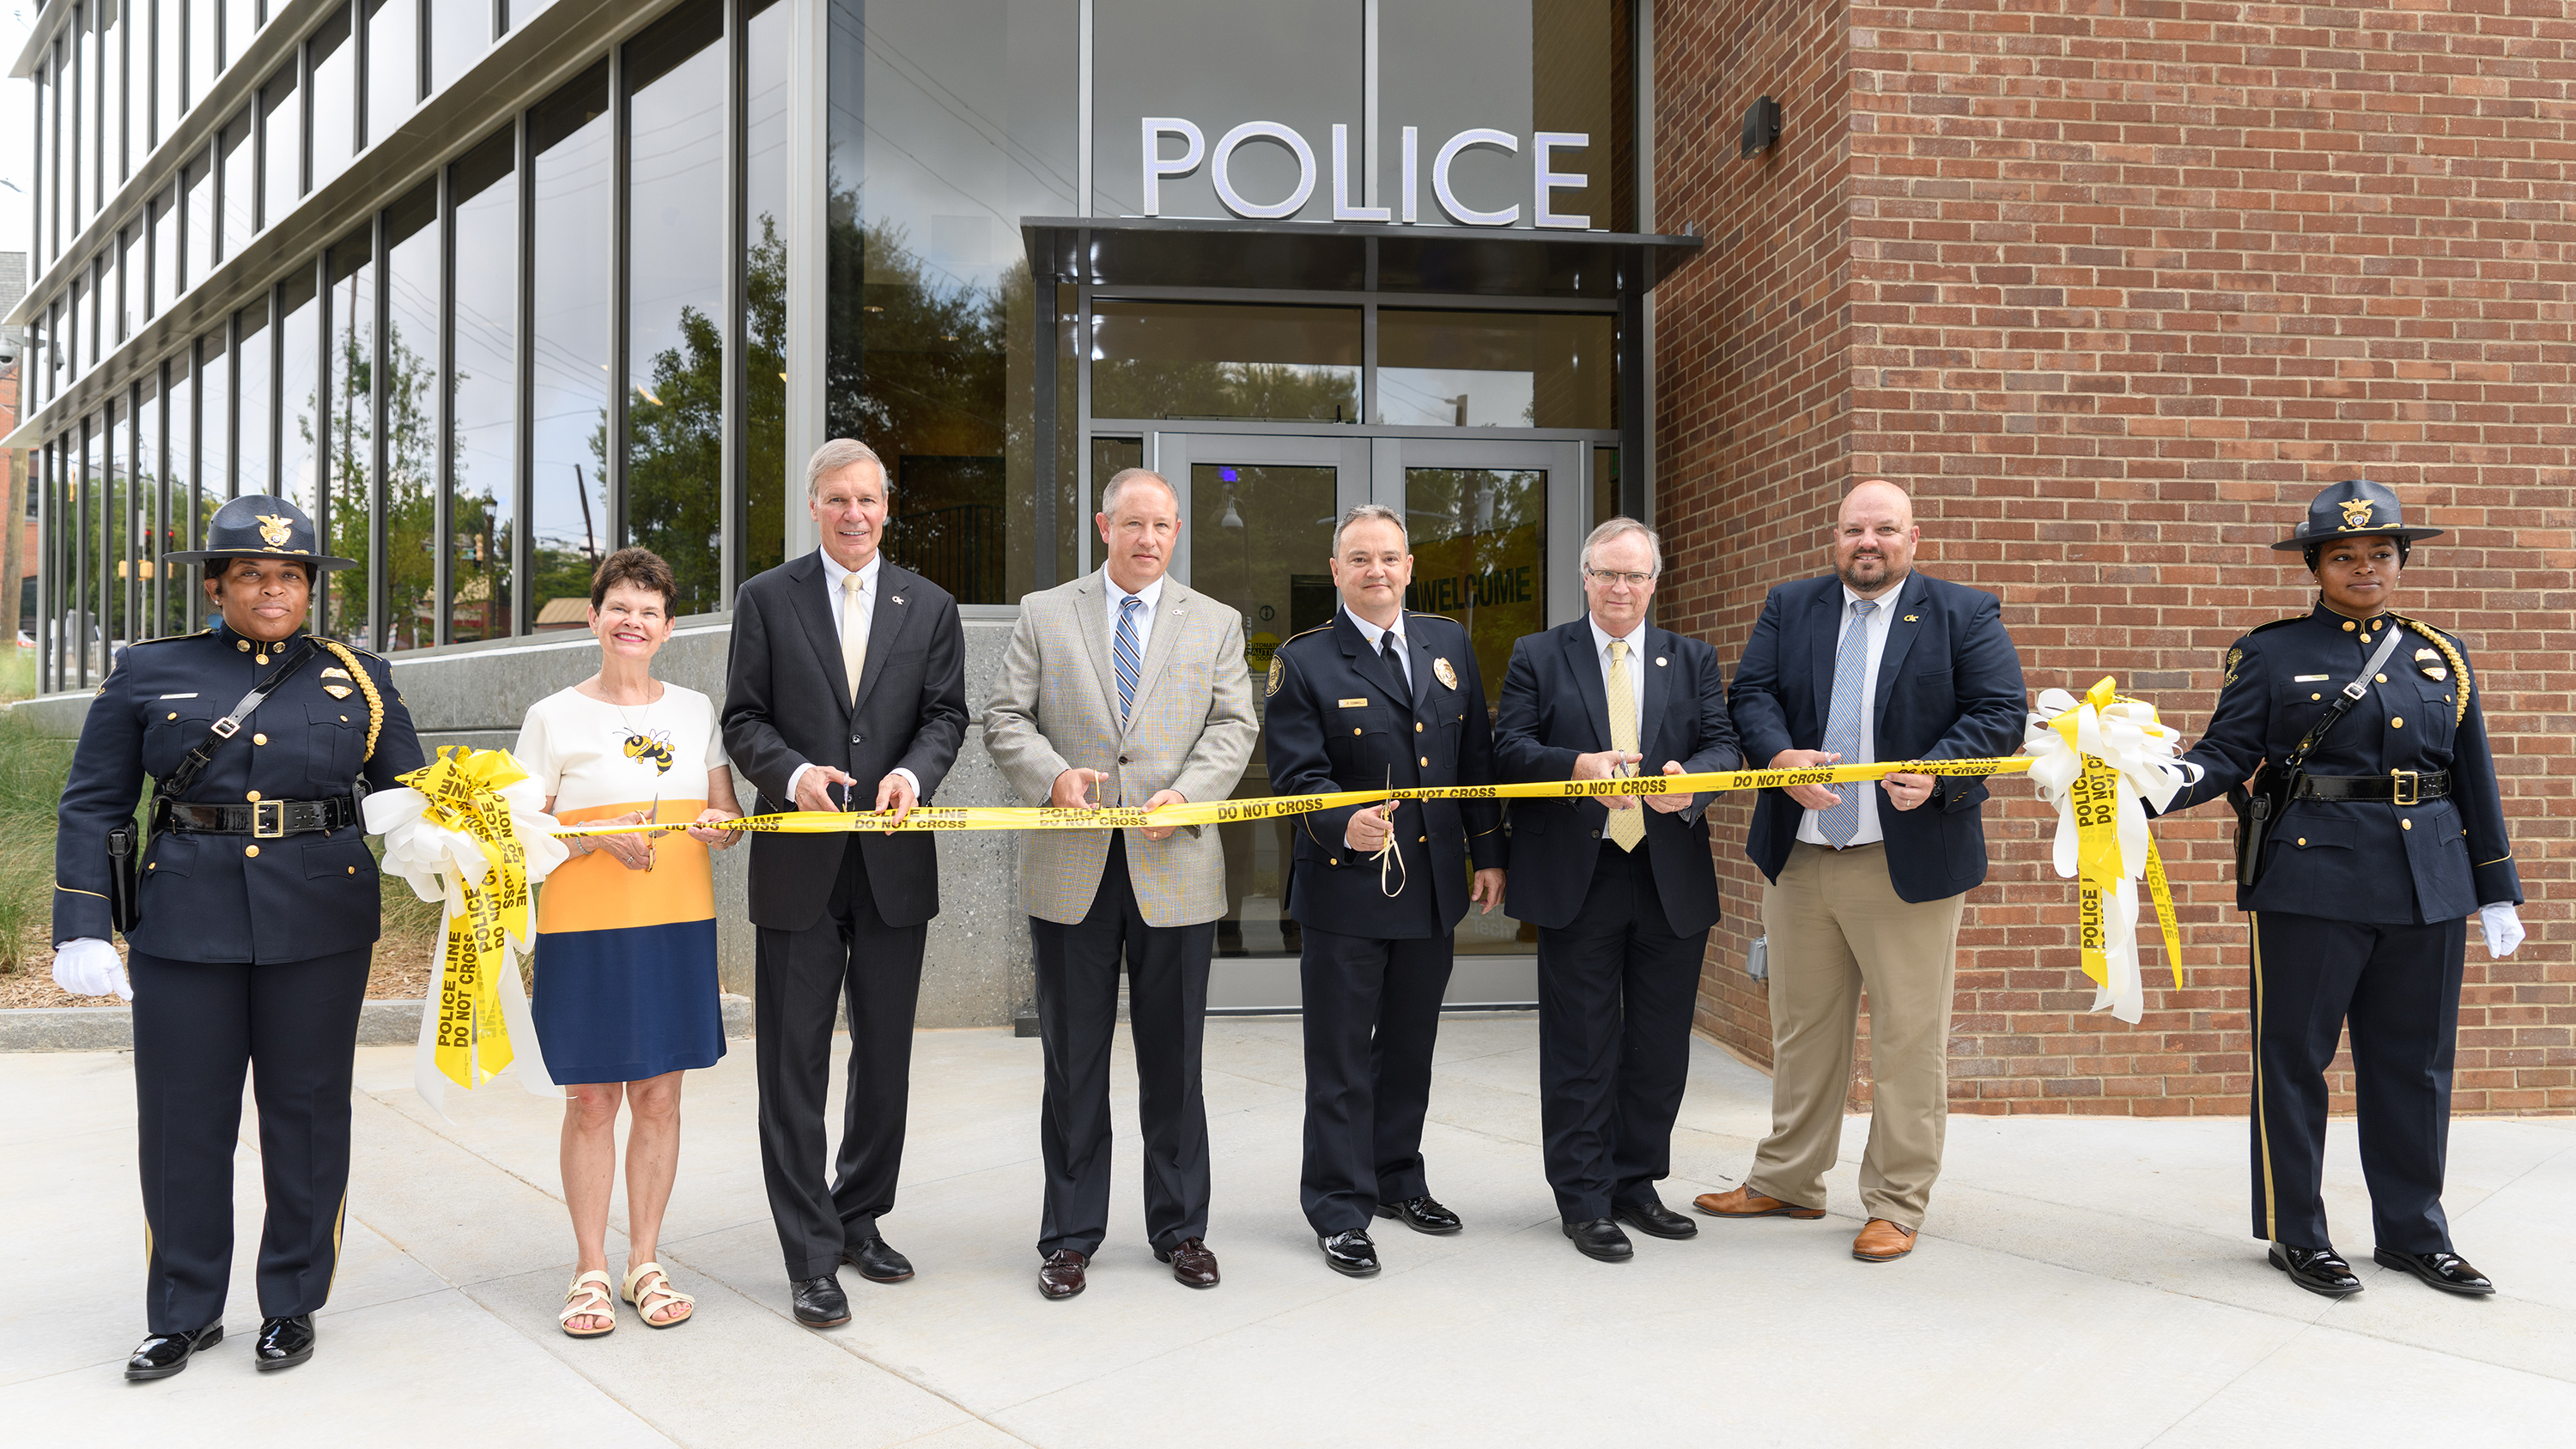 Georgia Tech Police Department Honor Guard accompanies Georgia Tech officials cut the ribbon on the new GTPD Police Department building. From left, Honor Guard Officer Cassandra Davis, First Lady Val Peterson, President G.P. "Bud" Peterson, Interim Executive Vice President of Administration and Finance Jim Fortner, GTPD Chief Robert Connolly, University System of Georgia Chief of Police Bruce Holmes, Director of Emergency Preparedness William Smith and Honor Guard Officer Jessica Howard. 